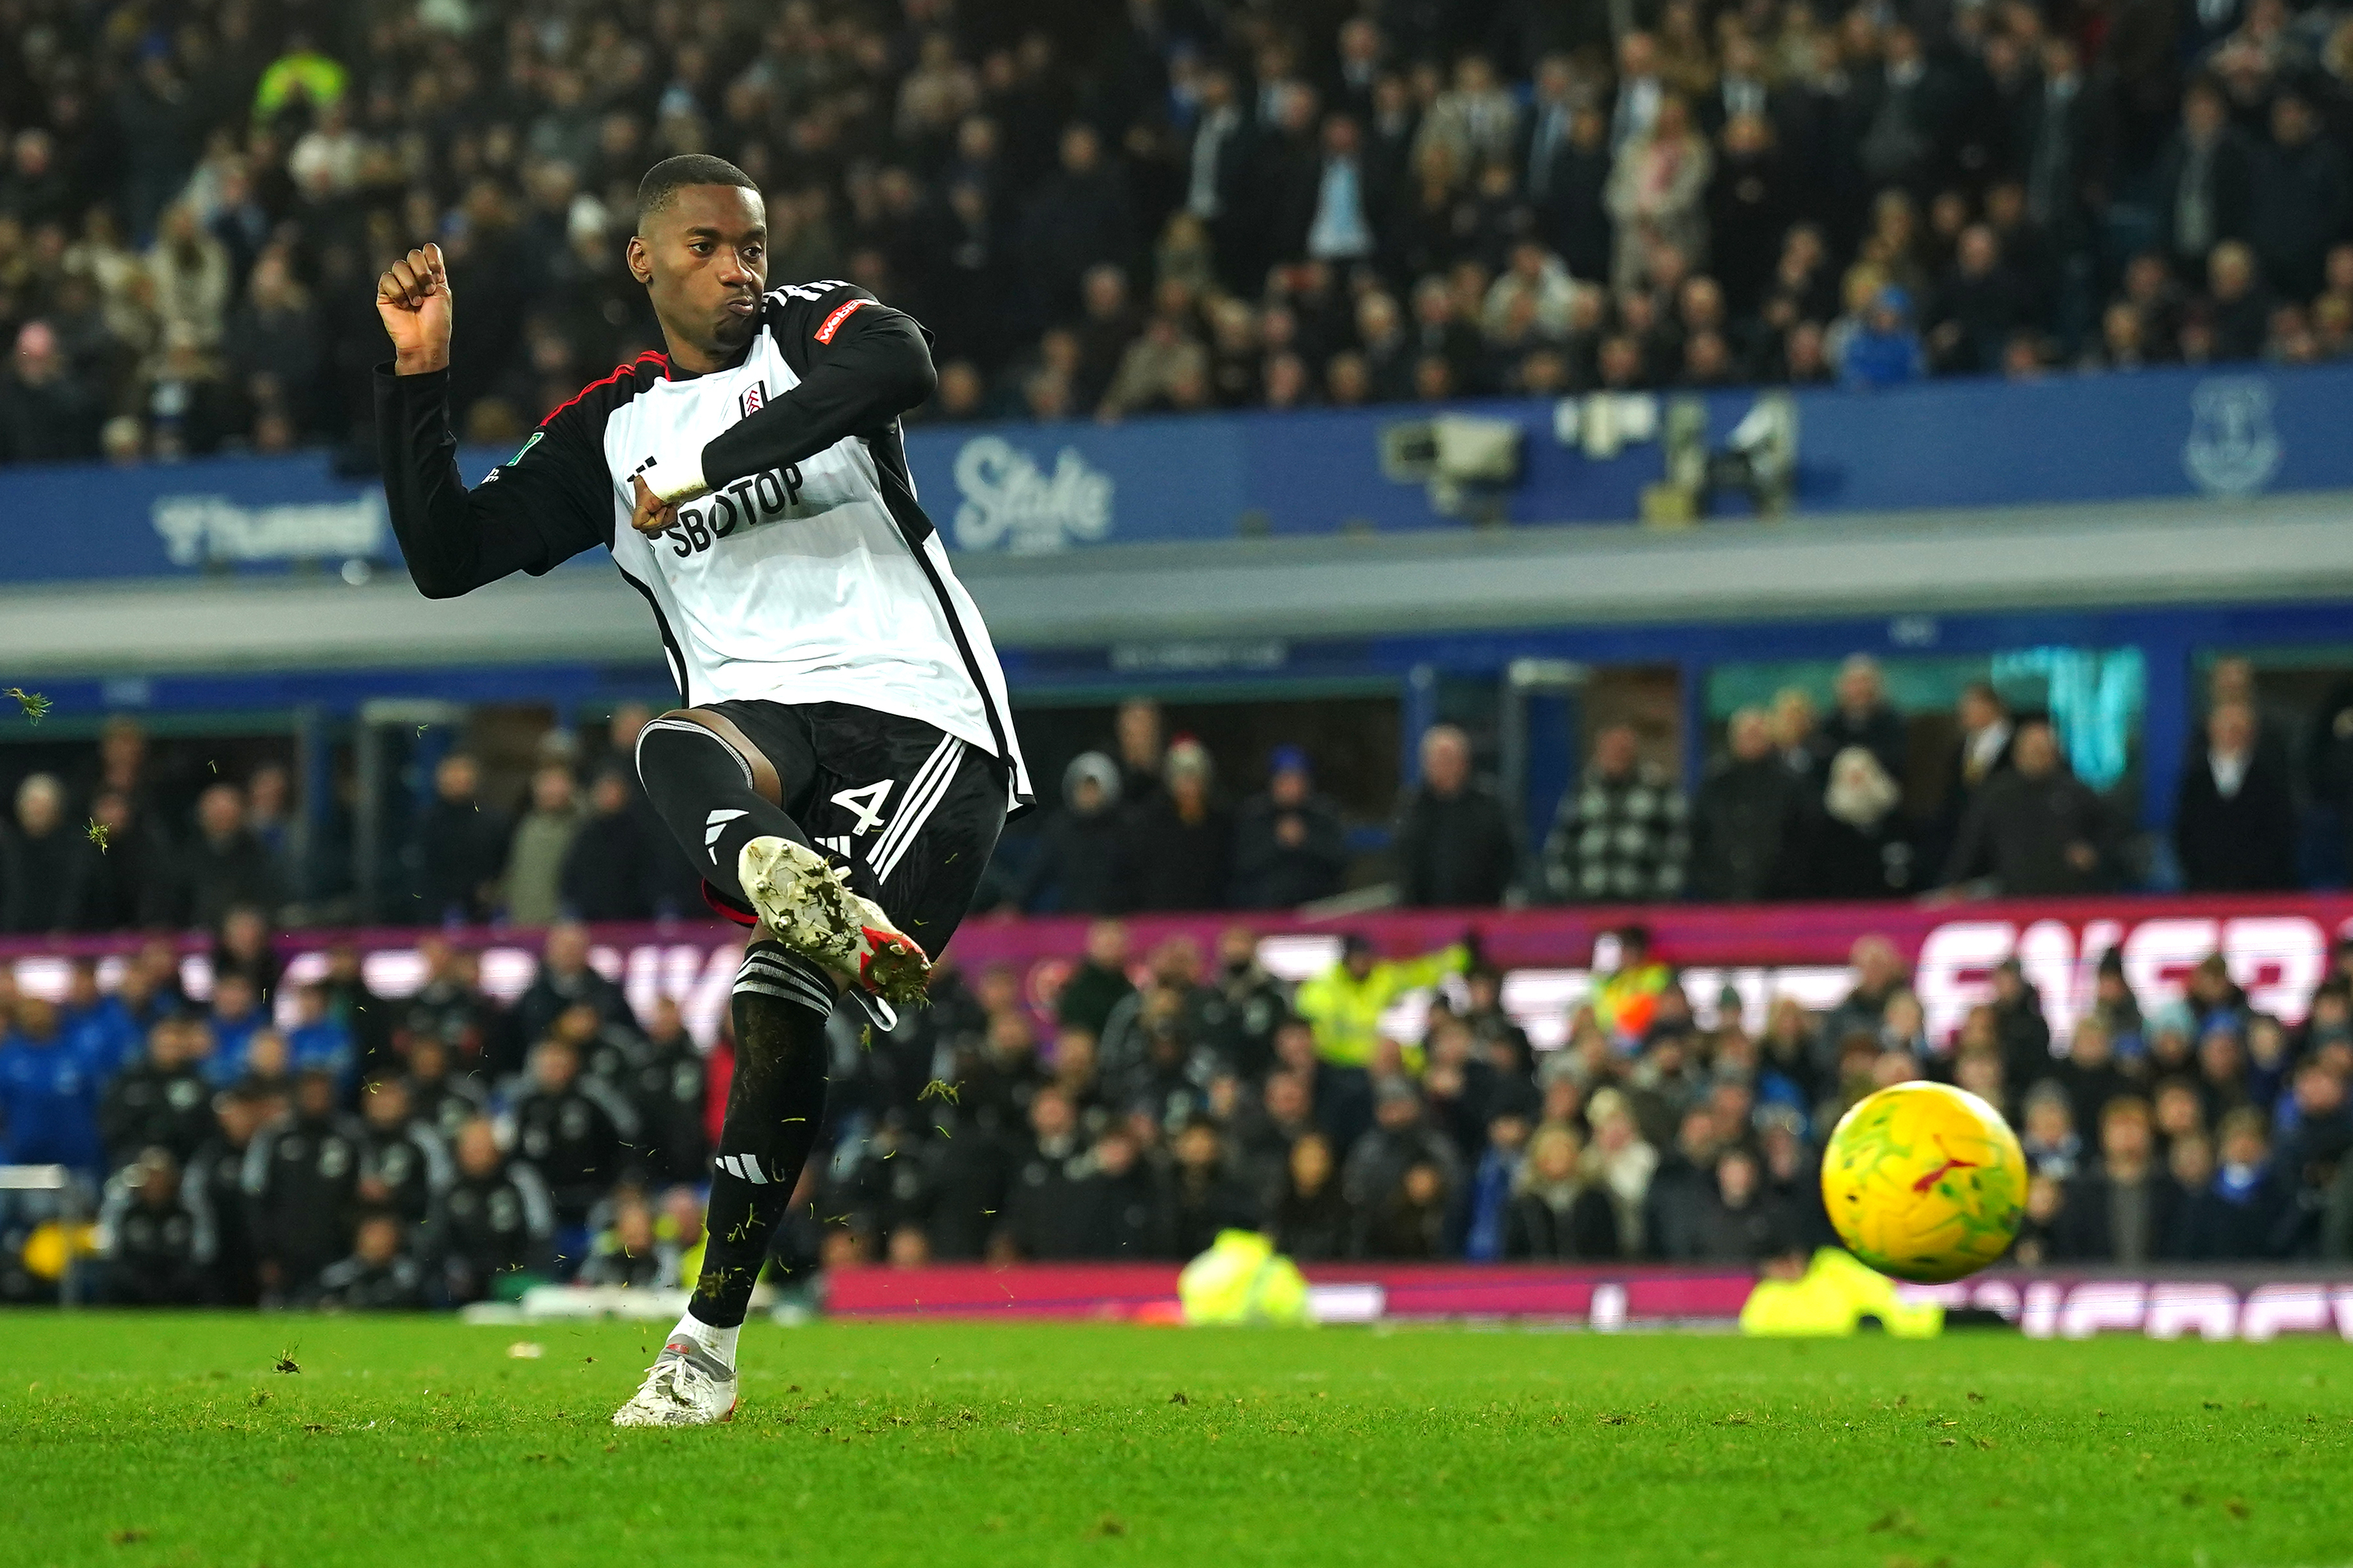 Tosin Adarabioyo scores to settle Fulham's shoot-out win over Everton